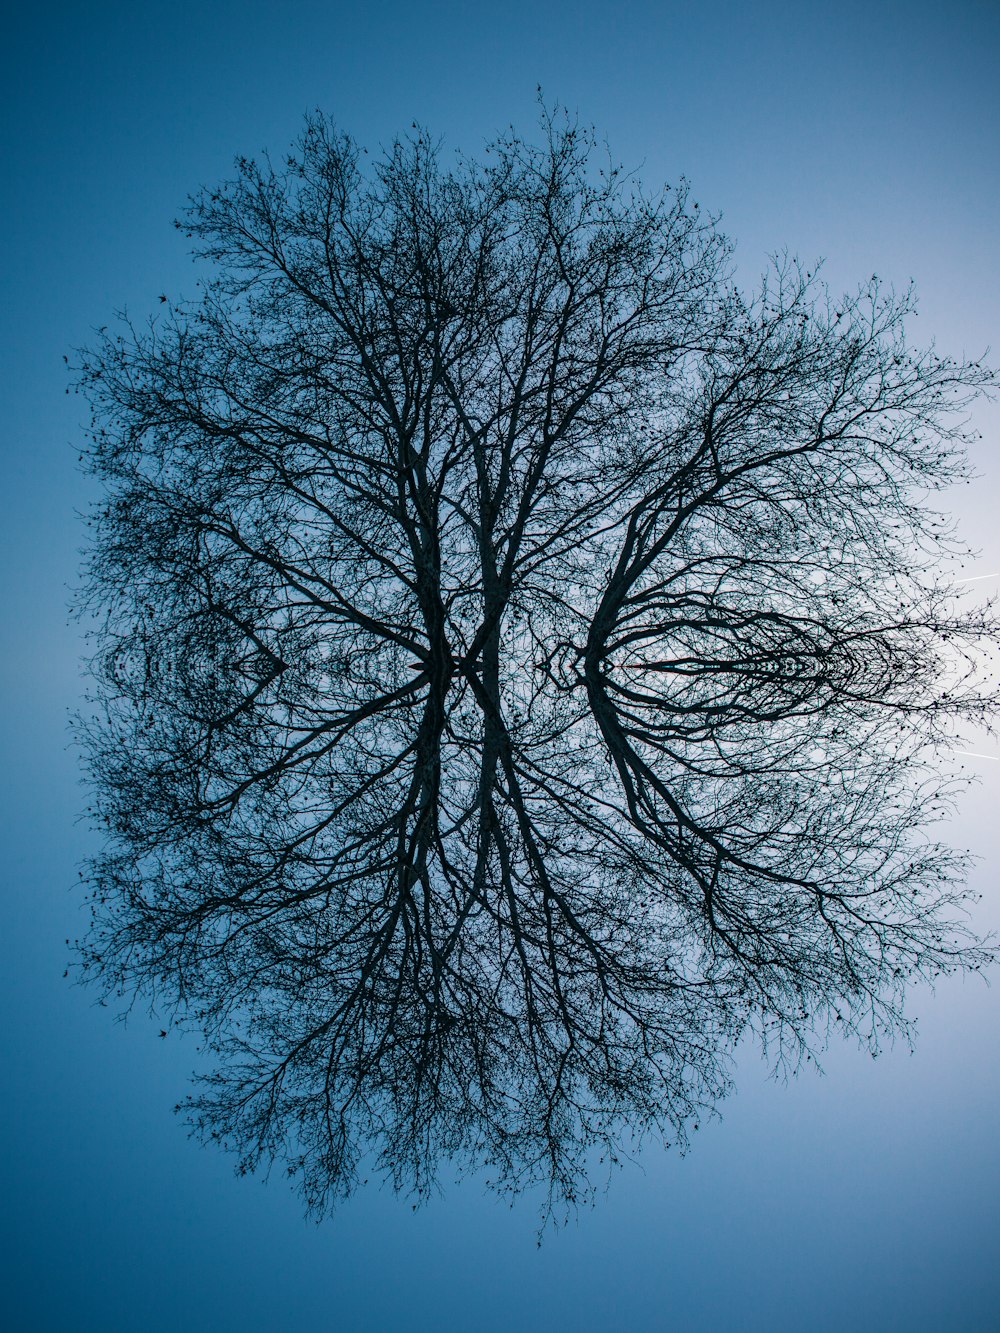 reflecting photo of bare tree on focus photography